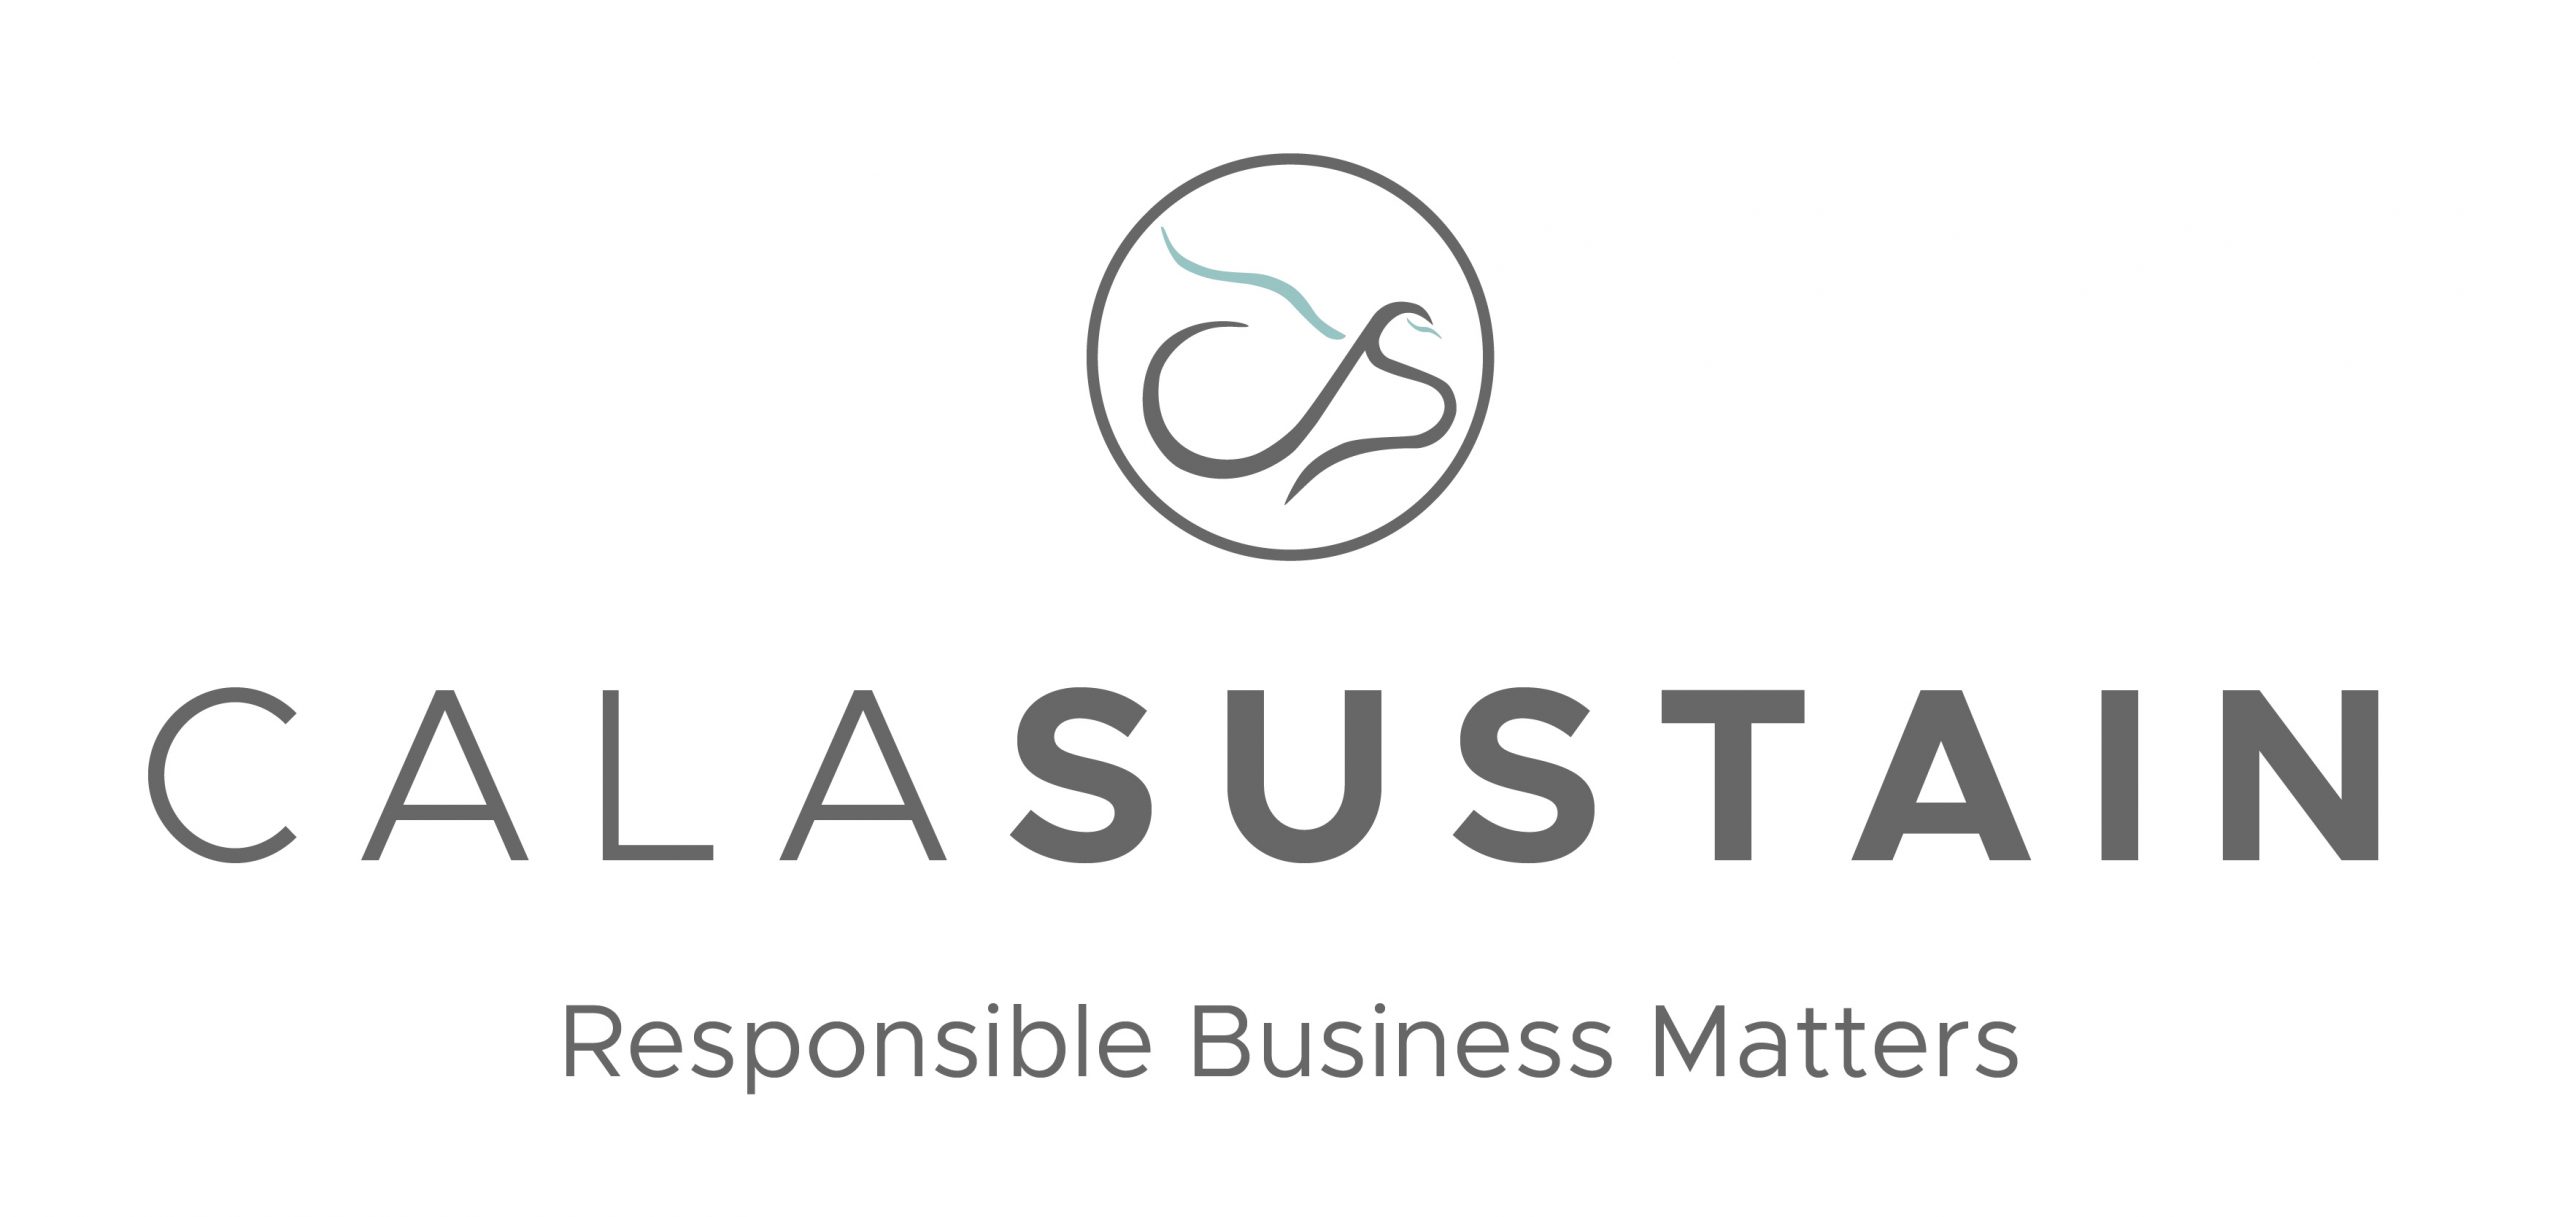 strategic sustainability and reporting